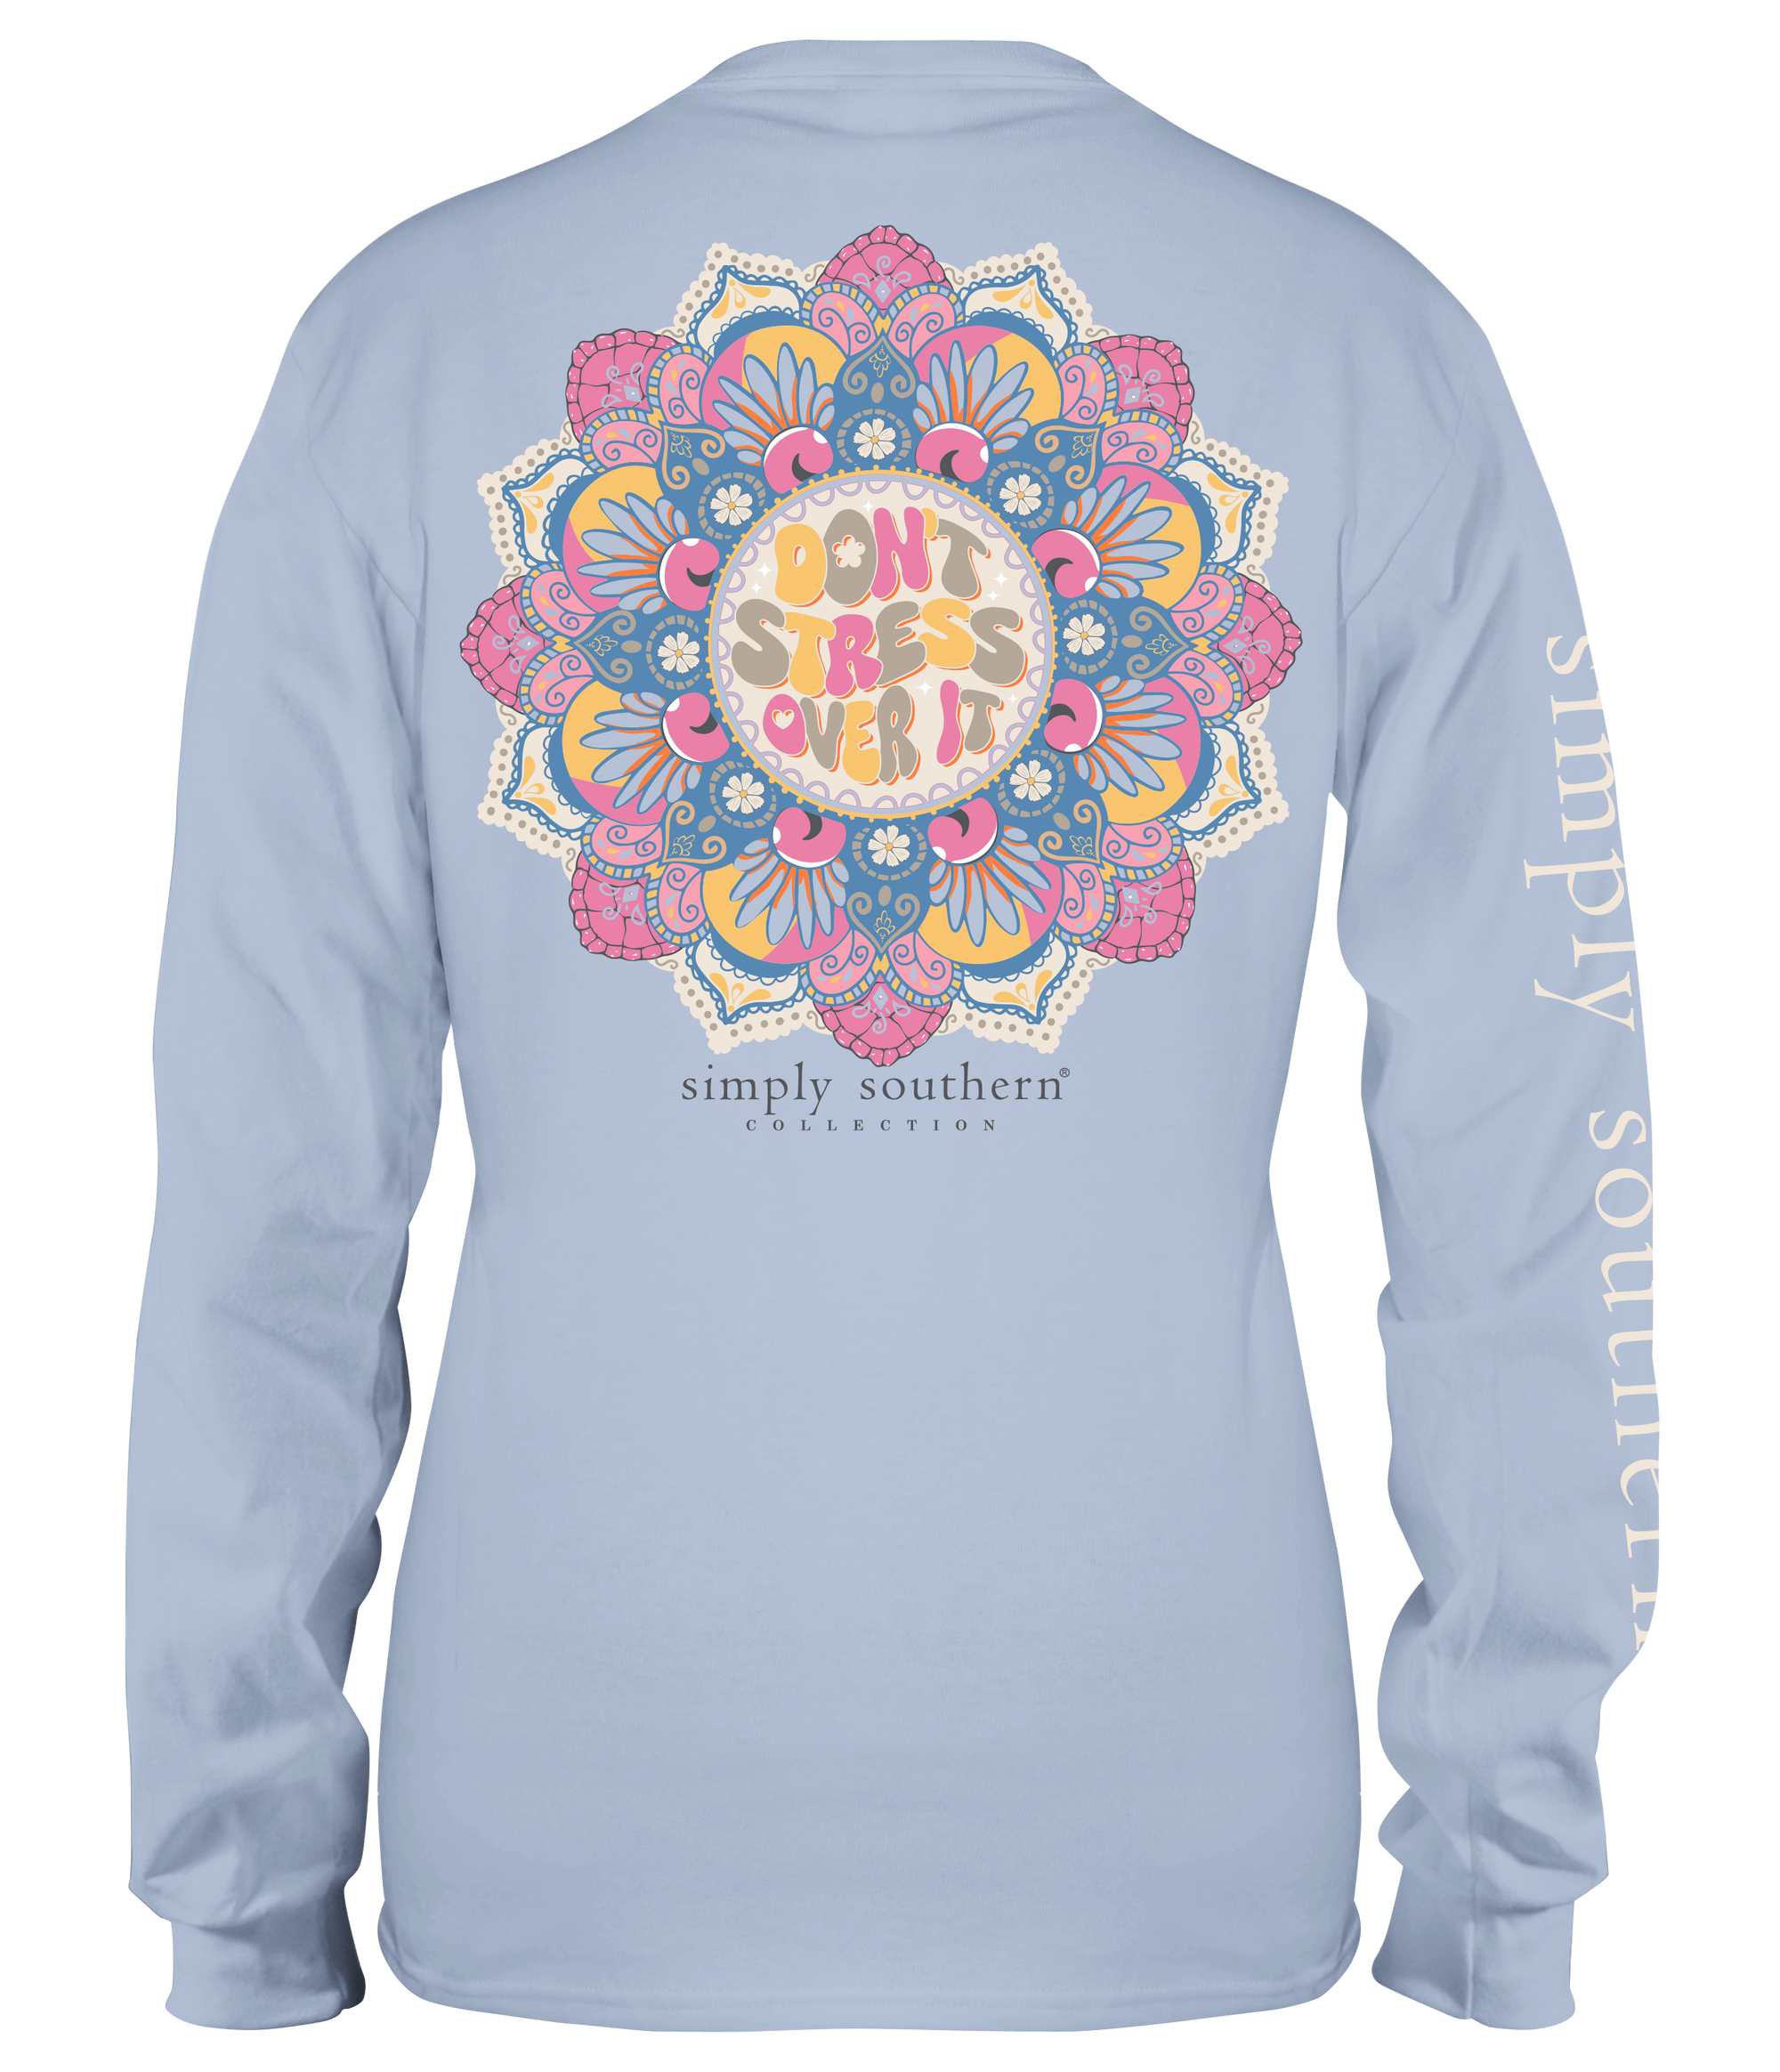 Simply Southern Don't Stress Over It Long Sleeve T-Shirt